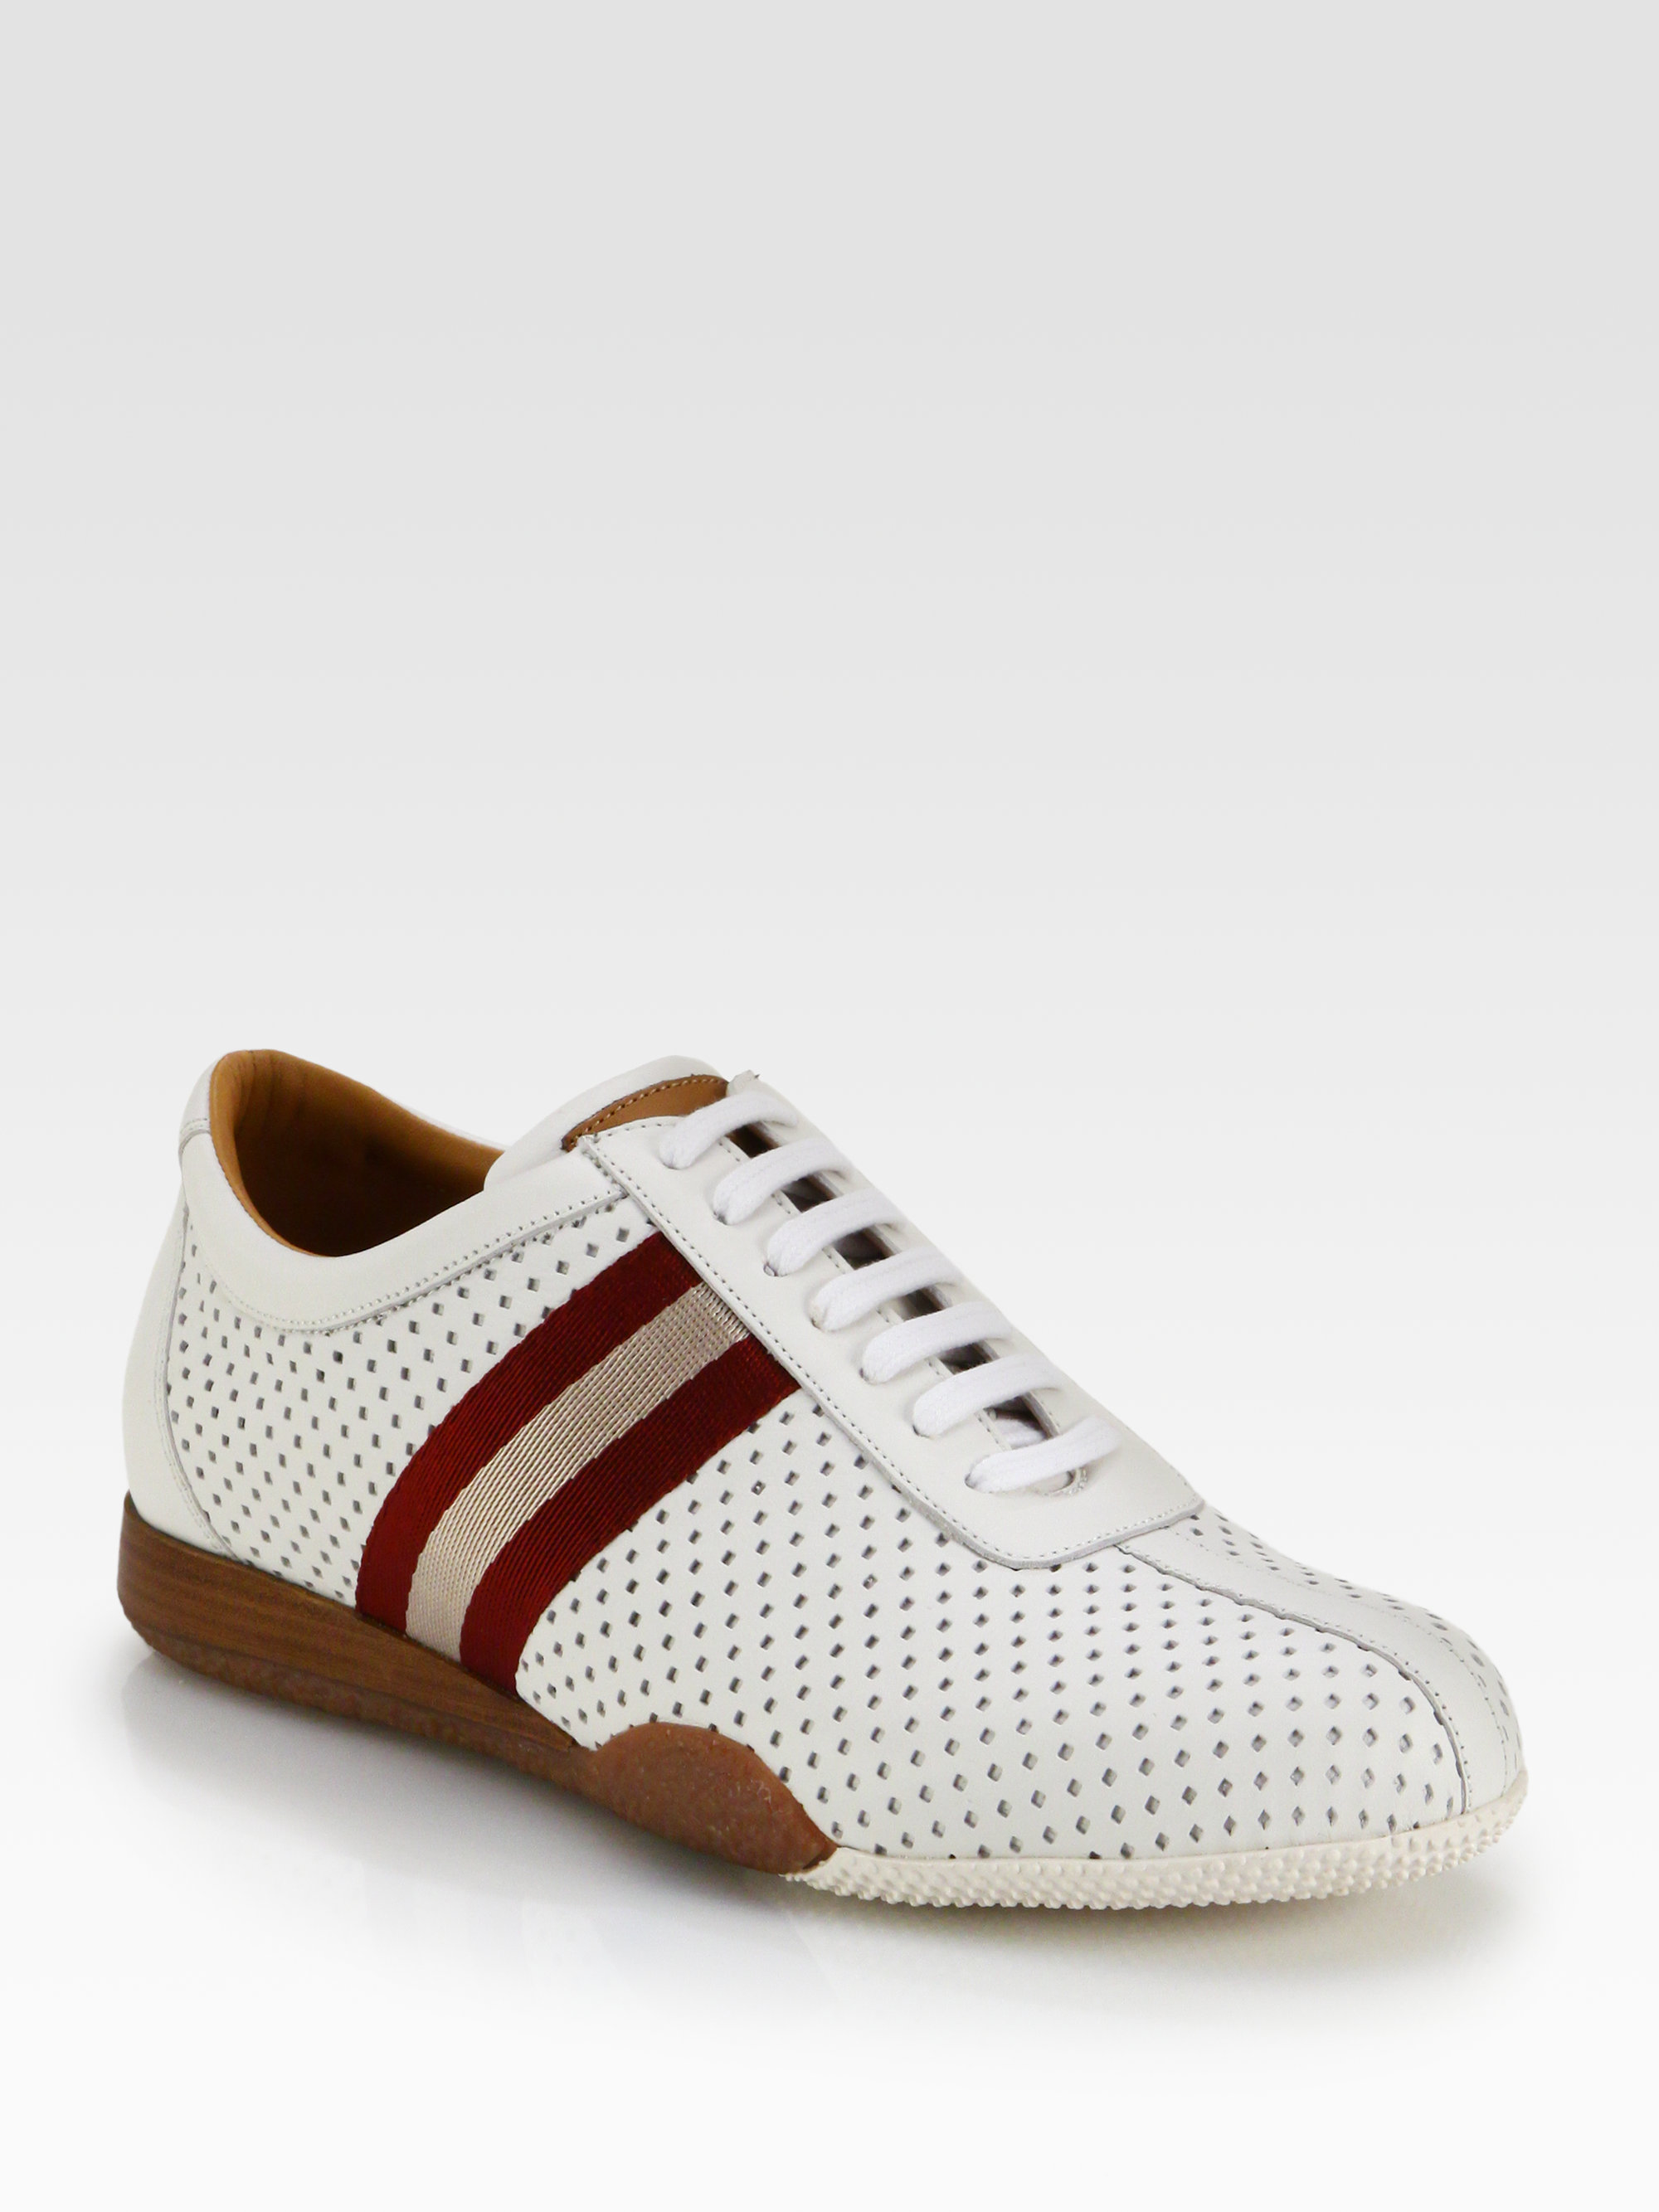 Lyst - Bally Perforated Leather Sneakers in White for Men